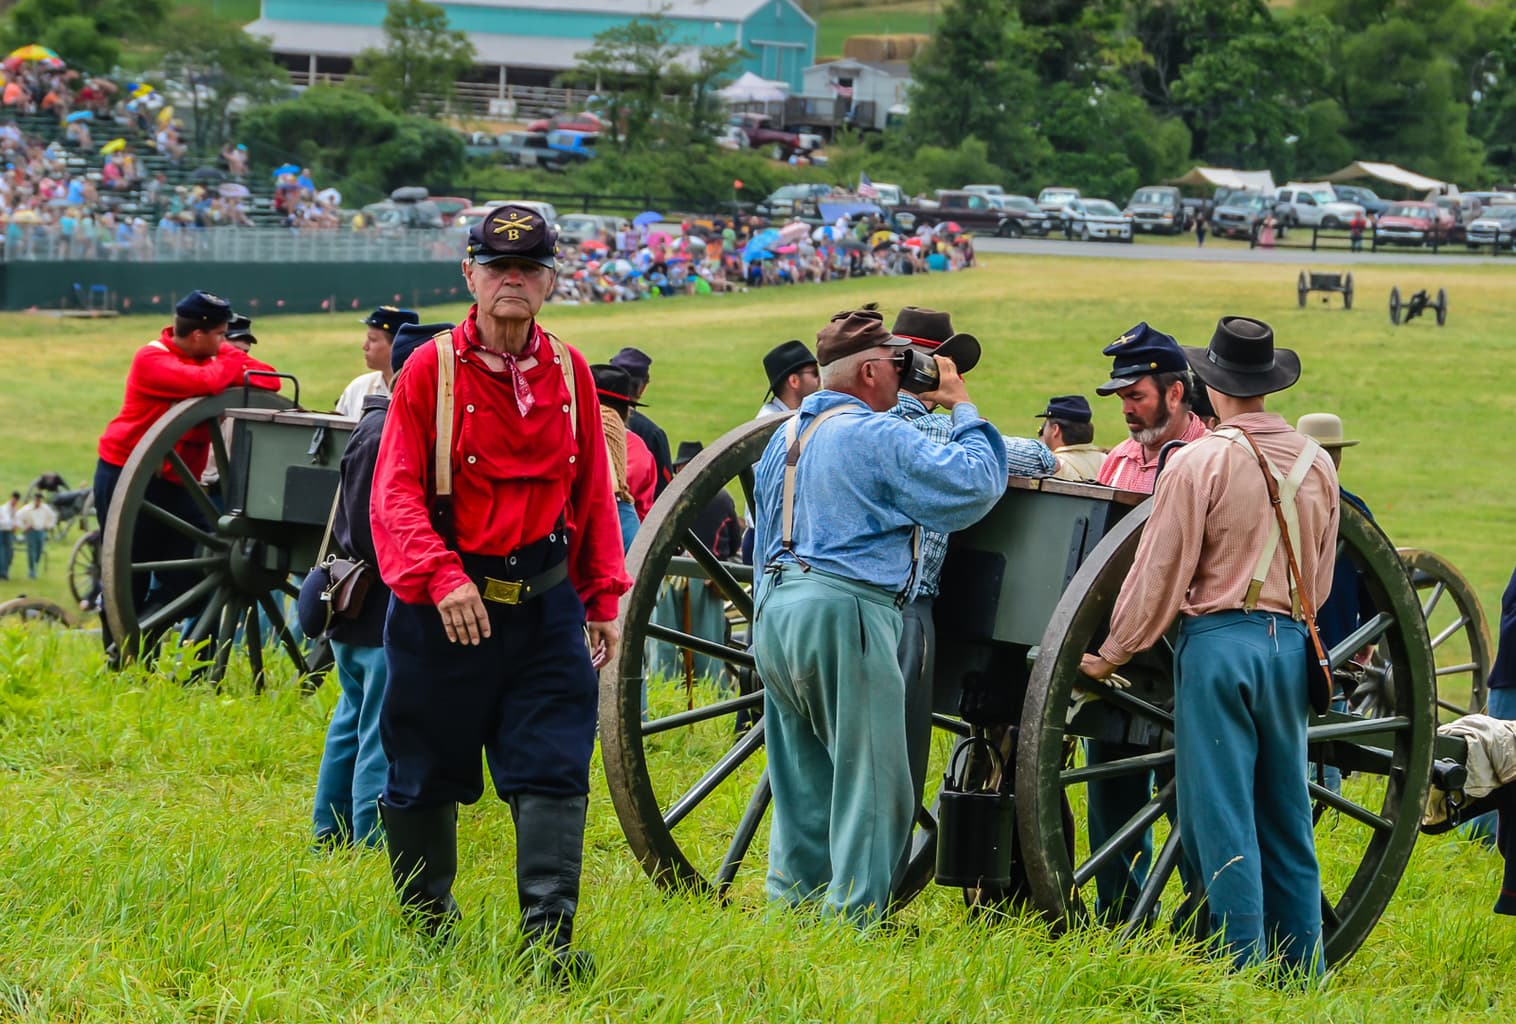 Gettysburg Battles reenactment tops our list of historical sites in the Northeast.